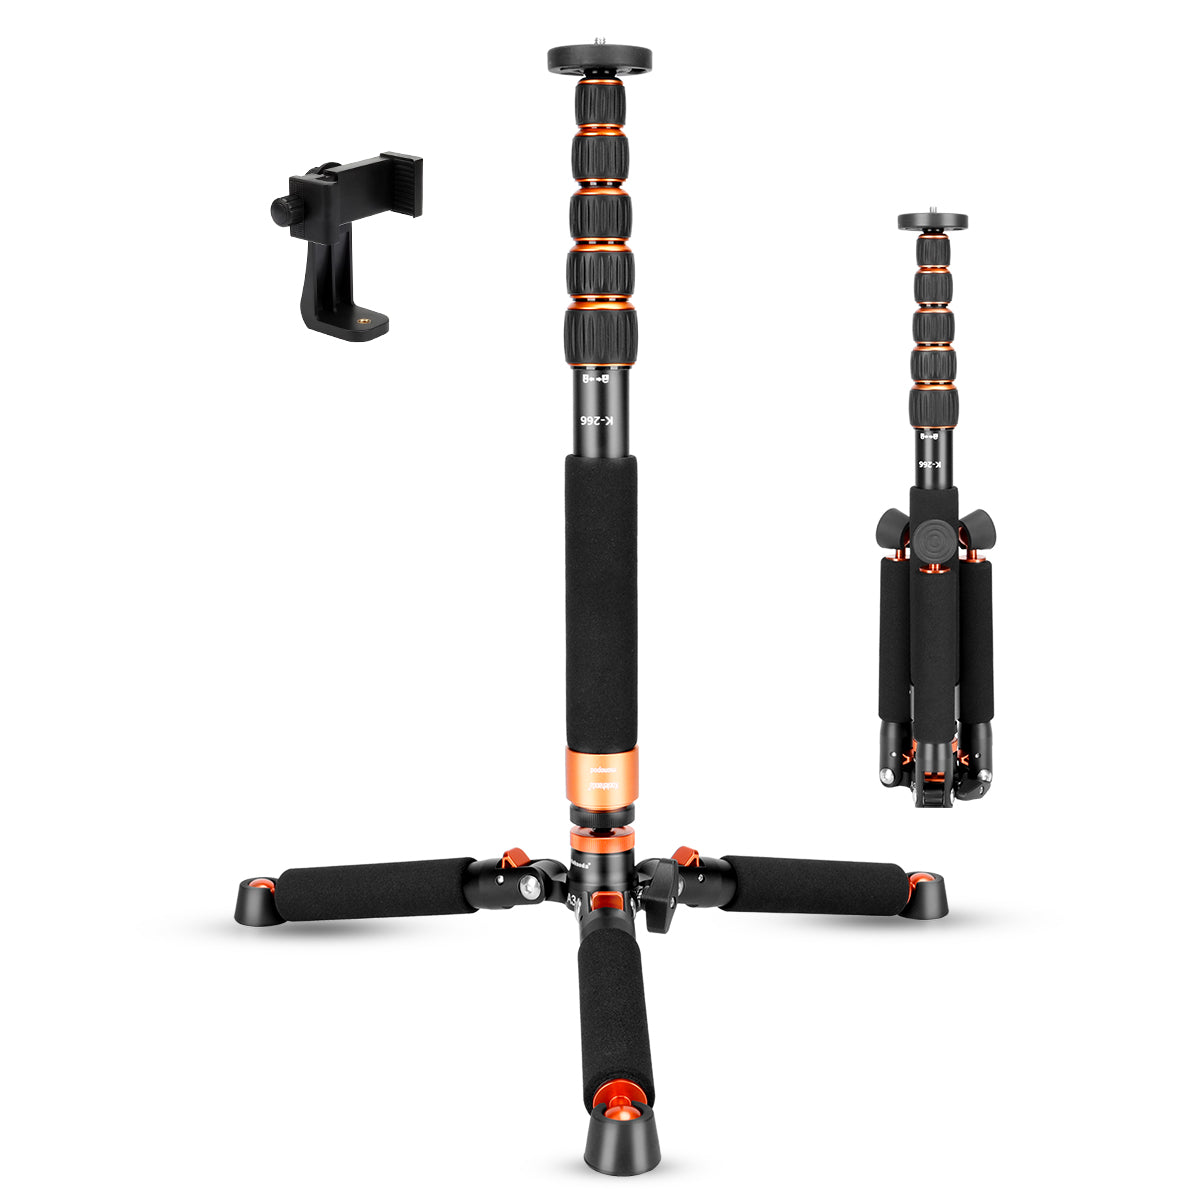 Camera Aluminum Monopod with Metal Tripod Base.6 Sections 46-177cm/18-69inch Adjustable, Leg Diameter Φ28mm,up to 6kg /13lbs